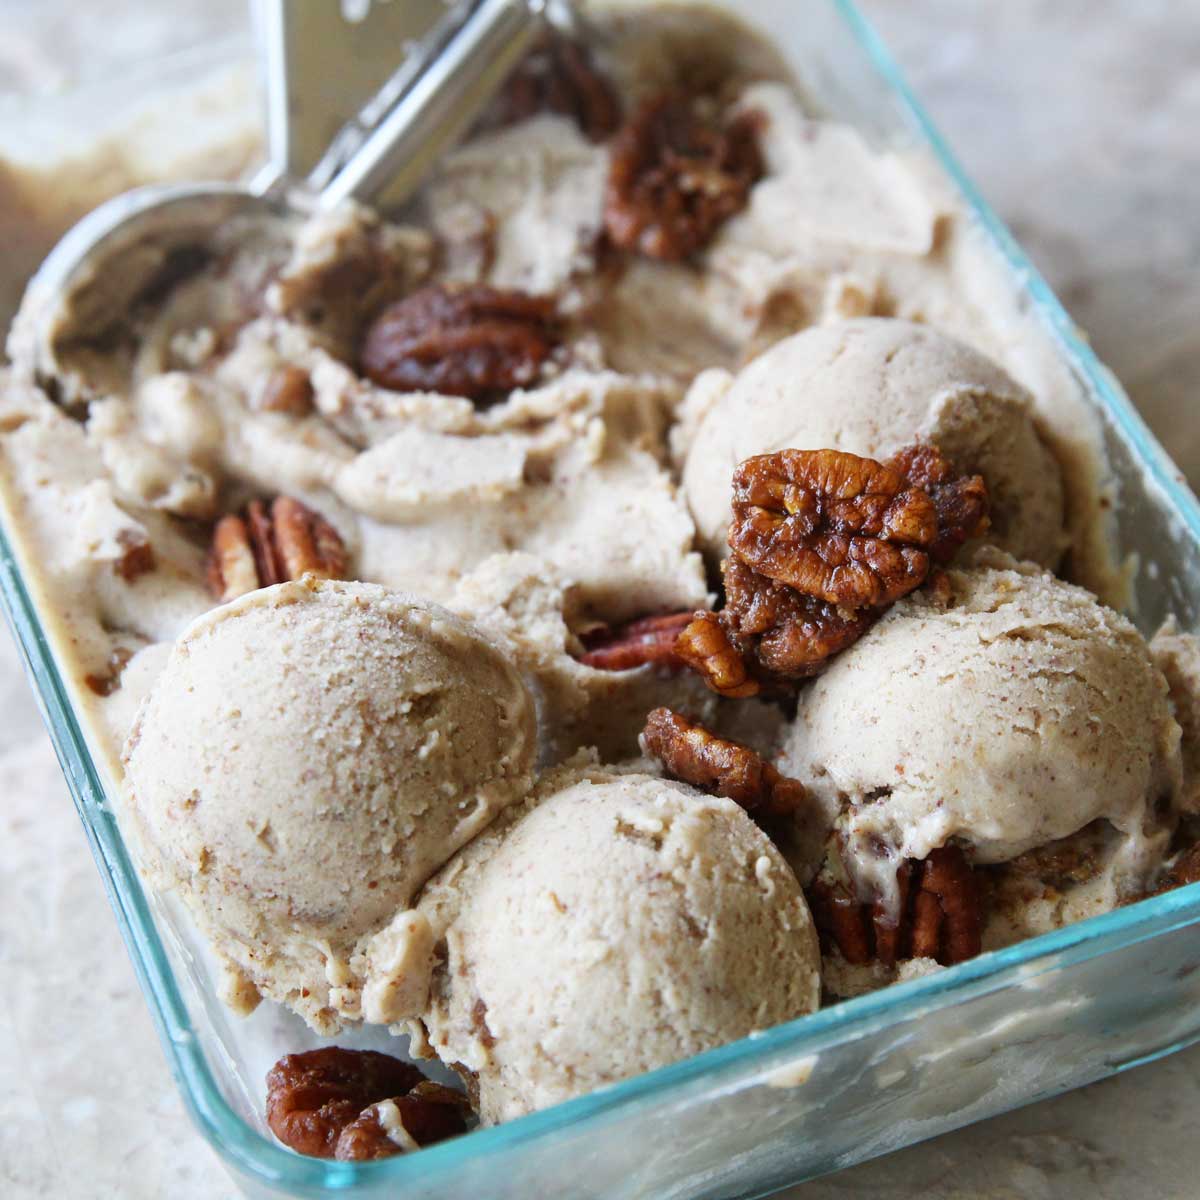 Healthy Pecan Butter Ice Cream (Made in the Food Processor) - Molasses Pumpkin Bread With Pecan